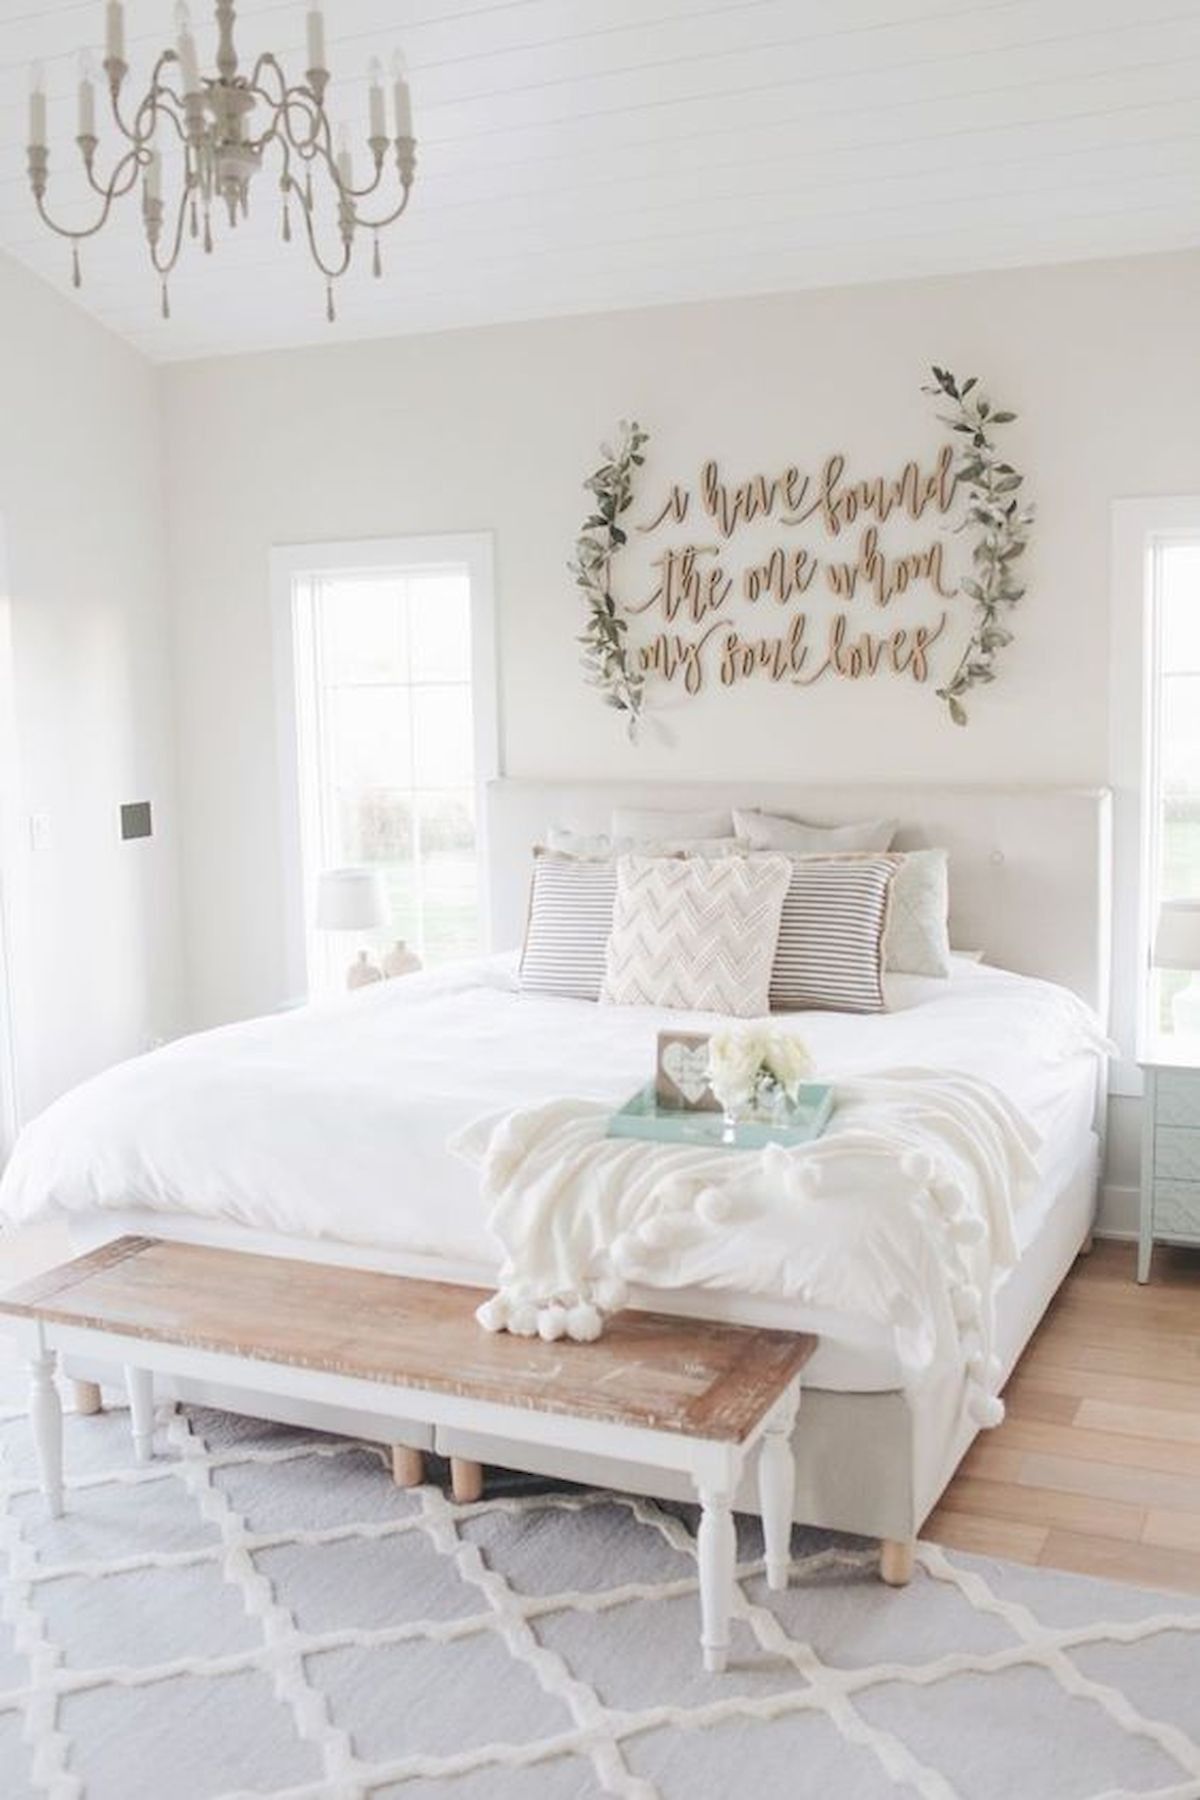 Wall Picture For Bedroom
 53 Best Farmhouse Wall Decor Ideas for bedroom Ideaboz